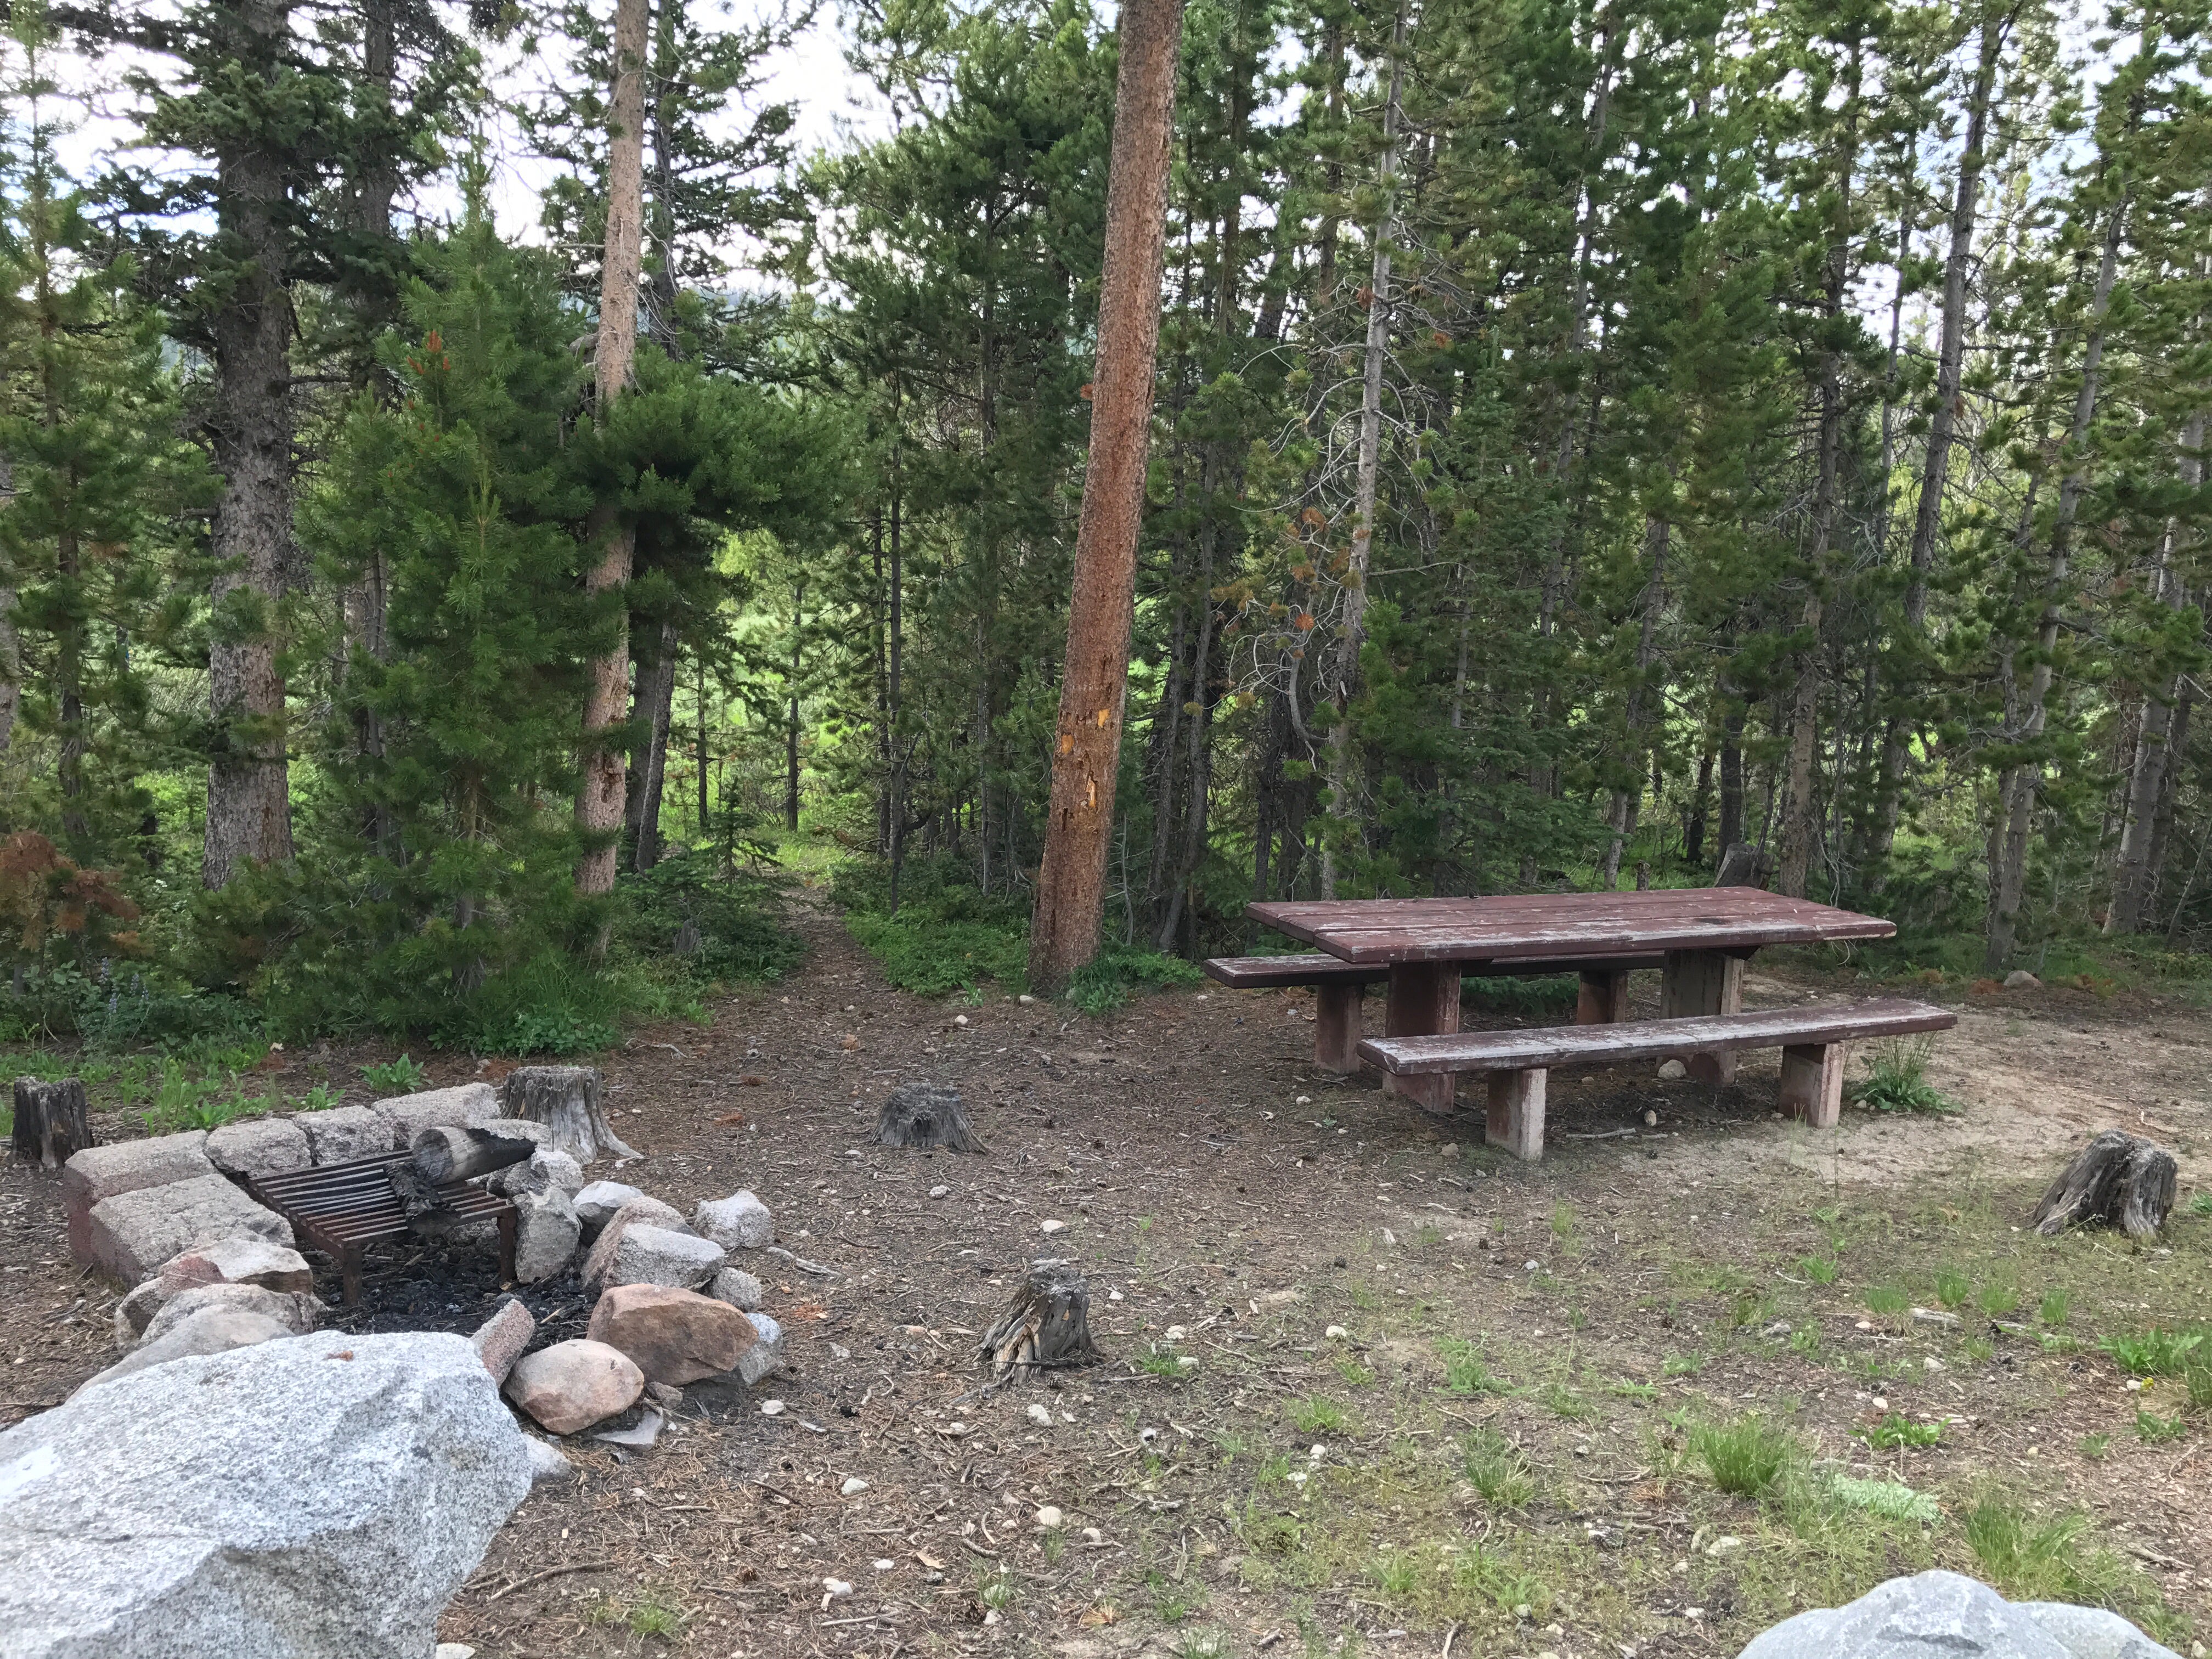 Camper submitted image from Little Popo Agie Campground - 1